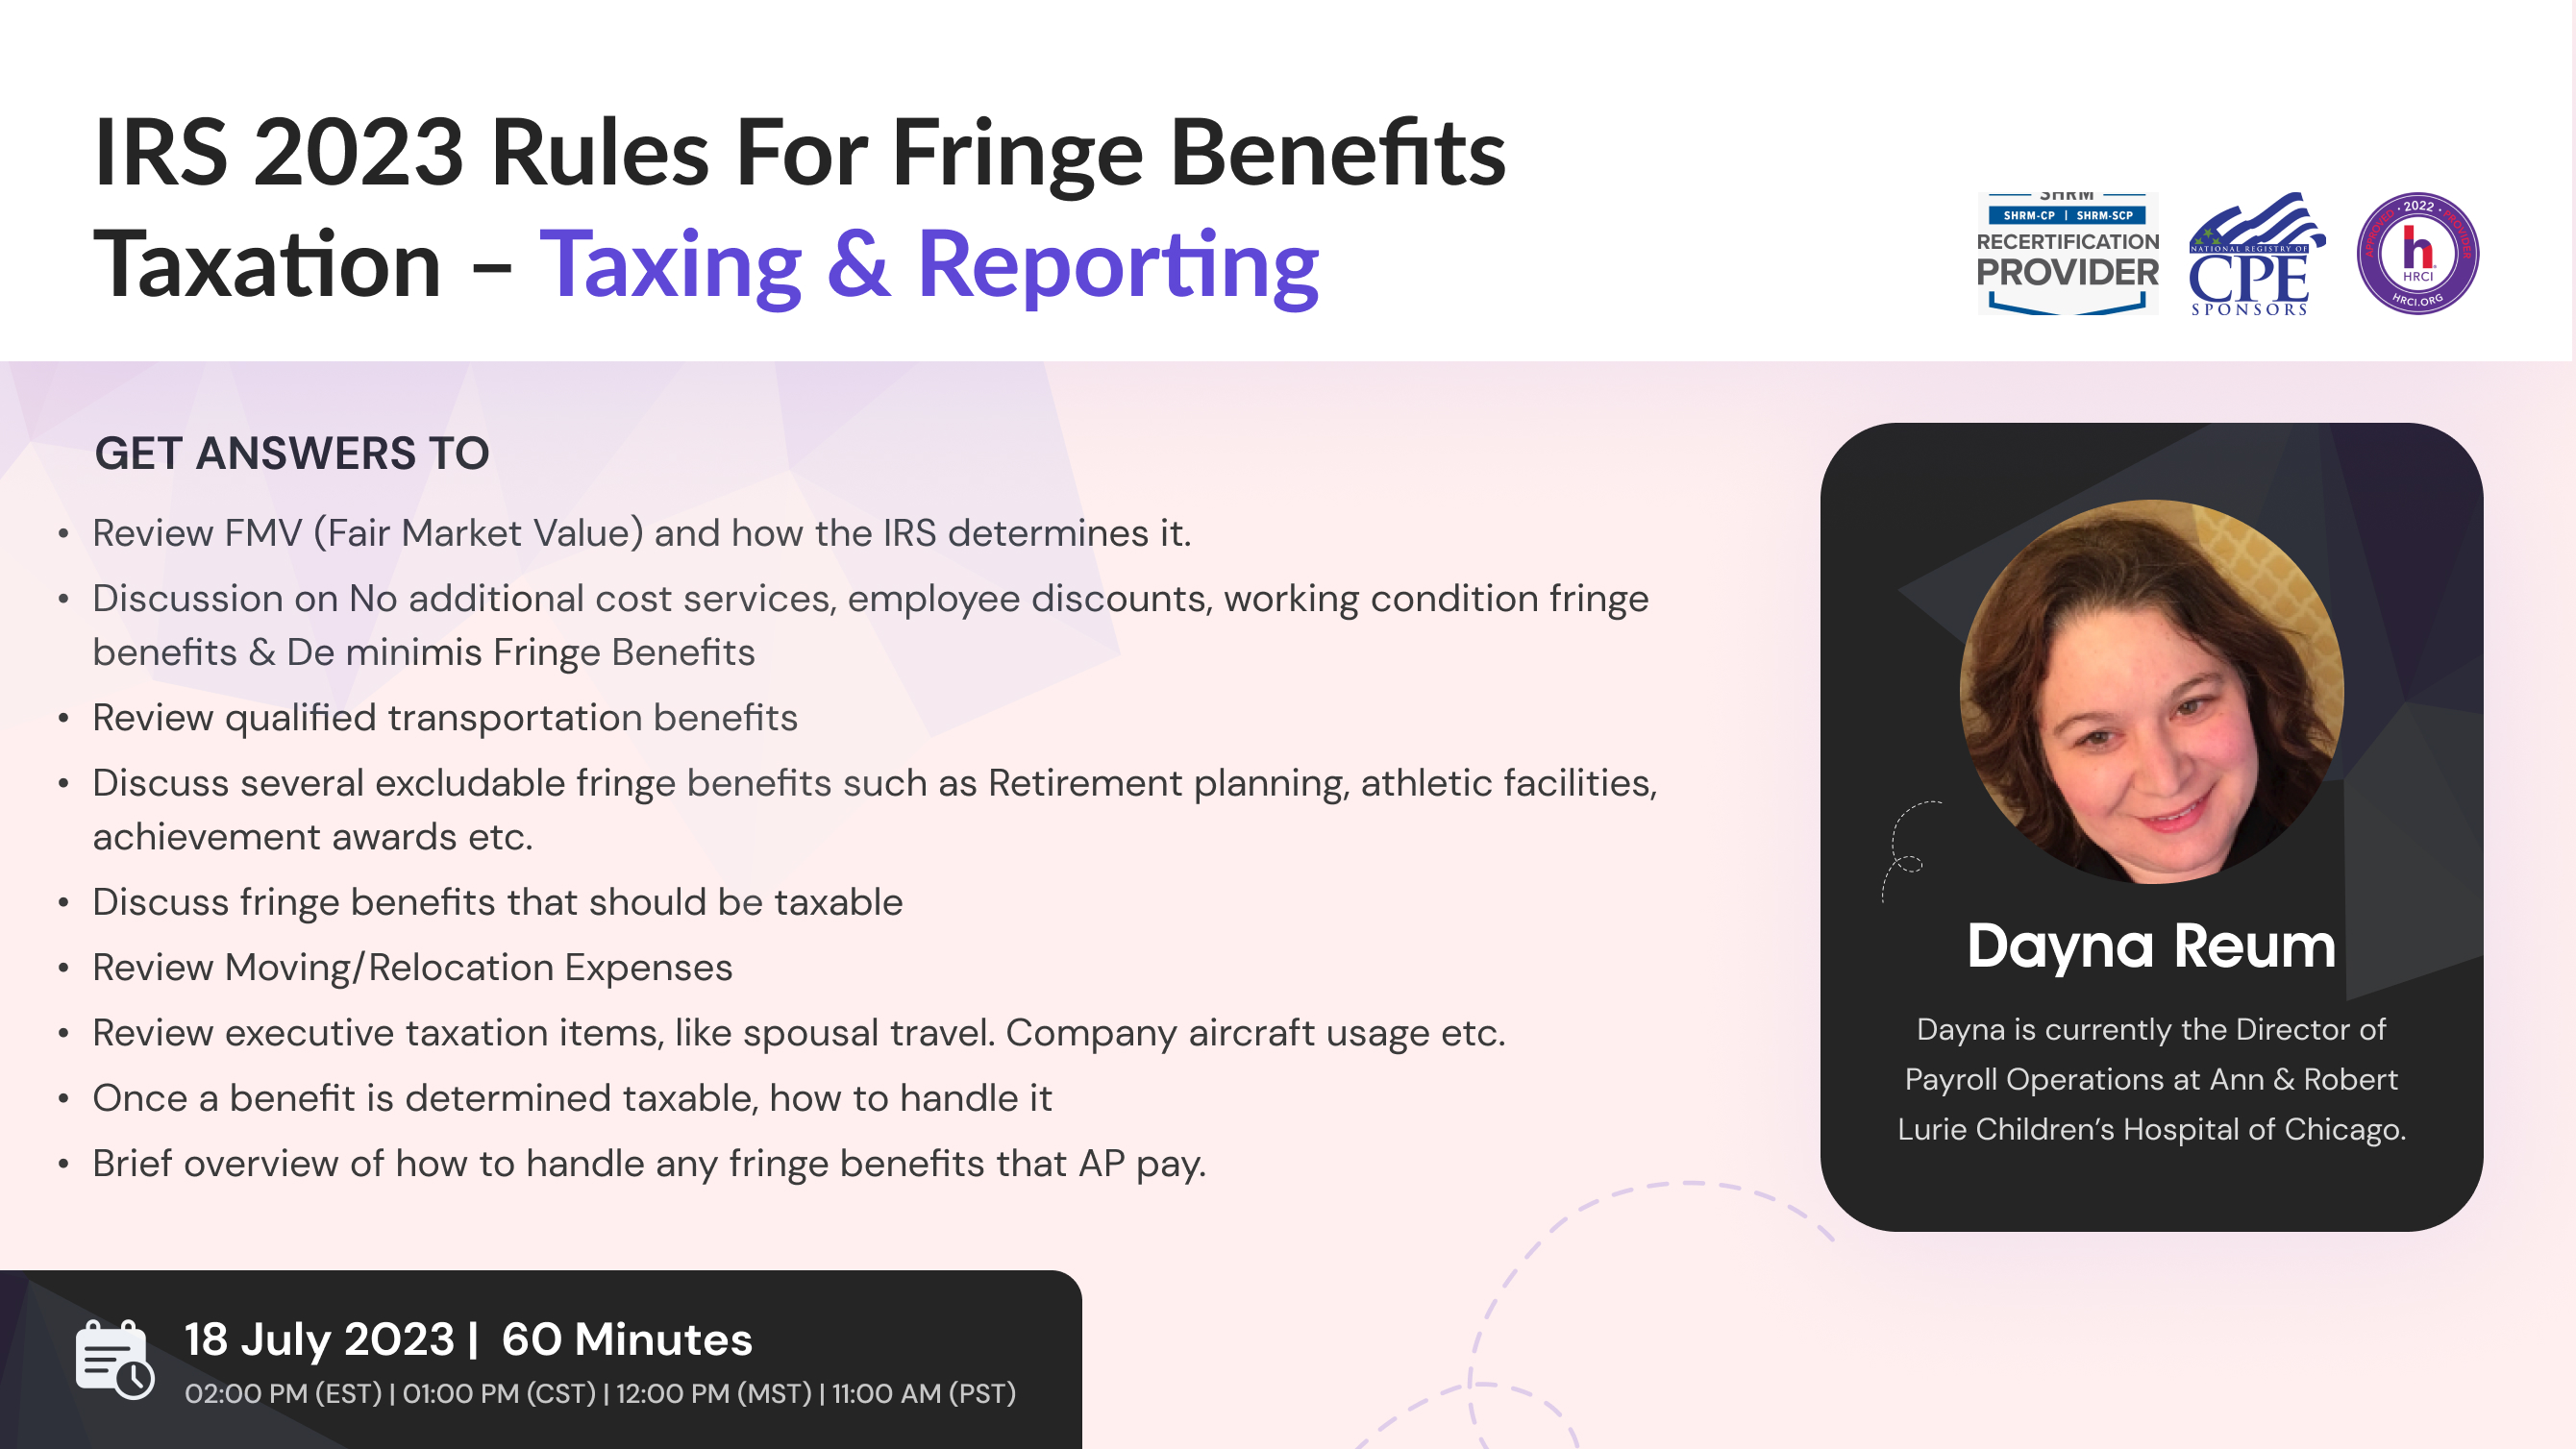 IRS 2023 Rules for Fringe Benefits Taxation – Taxing & Reporting